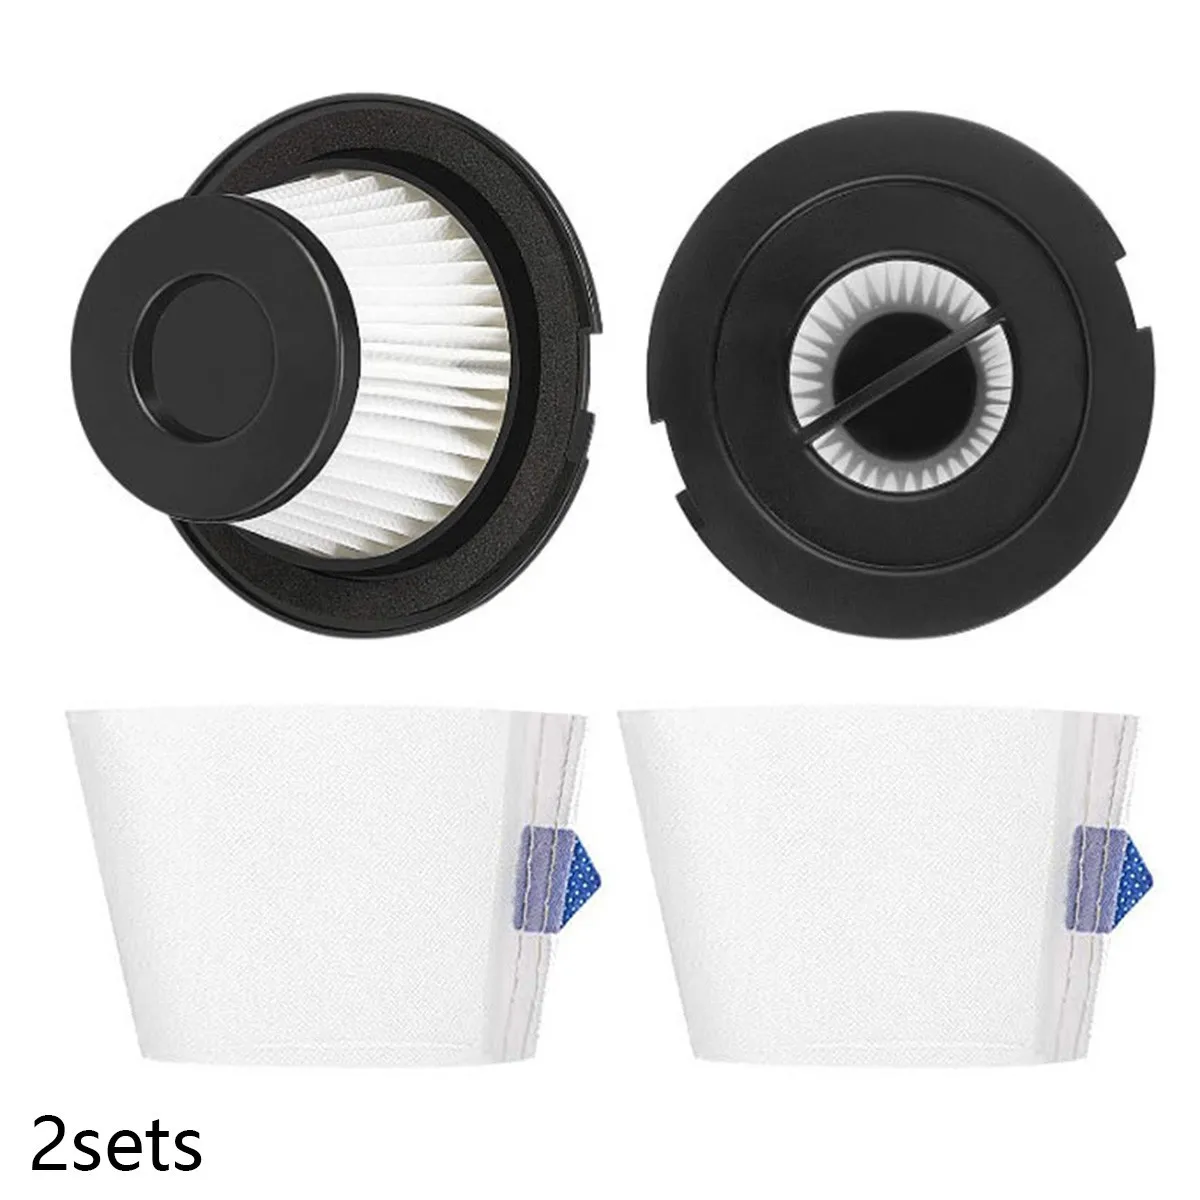 

2 Pcs Filter For TESLER 3000 2000, For Kitfort Kt-541 Vacuum Cleaner Vacuum Cleaner Replacement Tools For Home